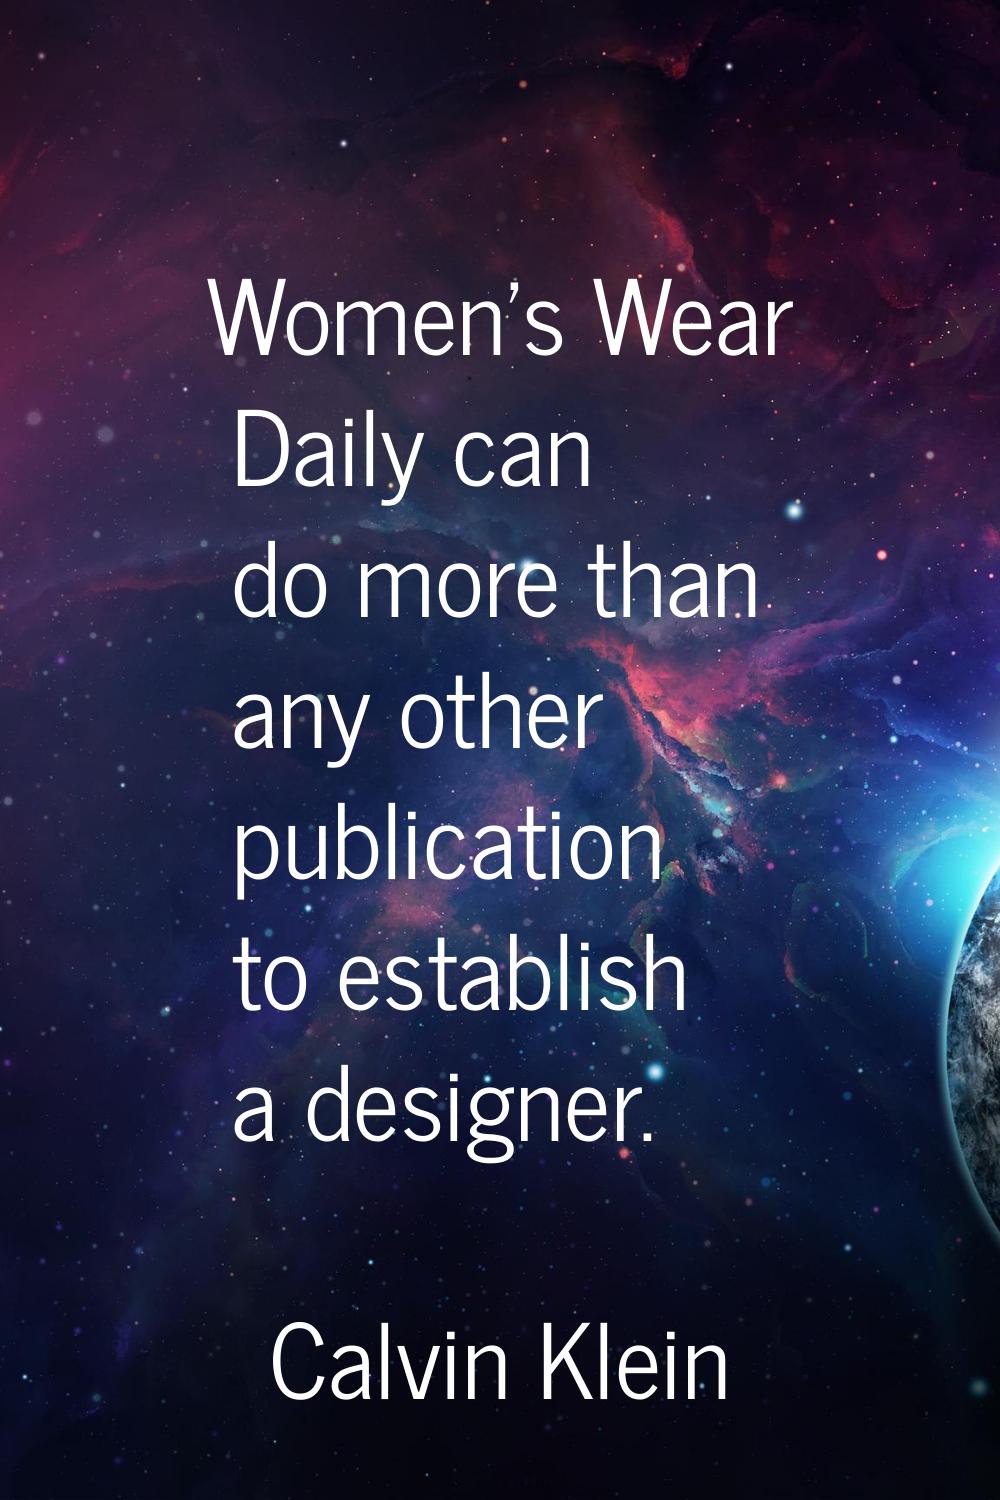 Women's Wear Daily can do more than any other publication to establish a designer.